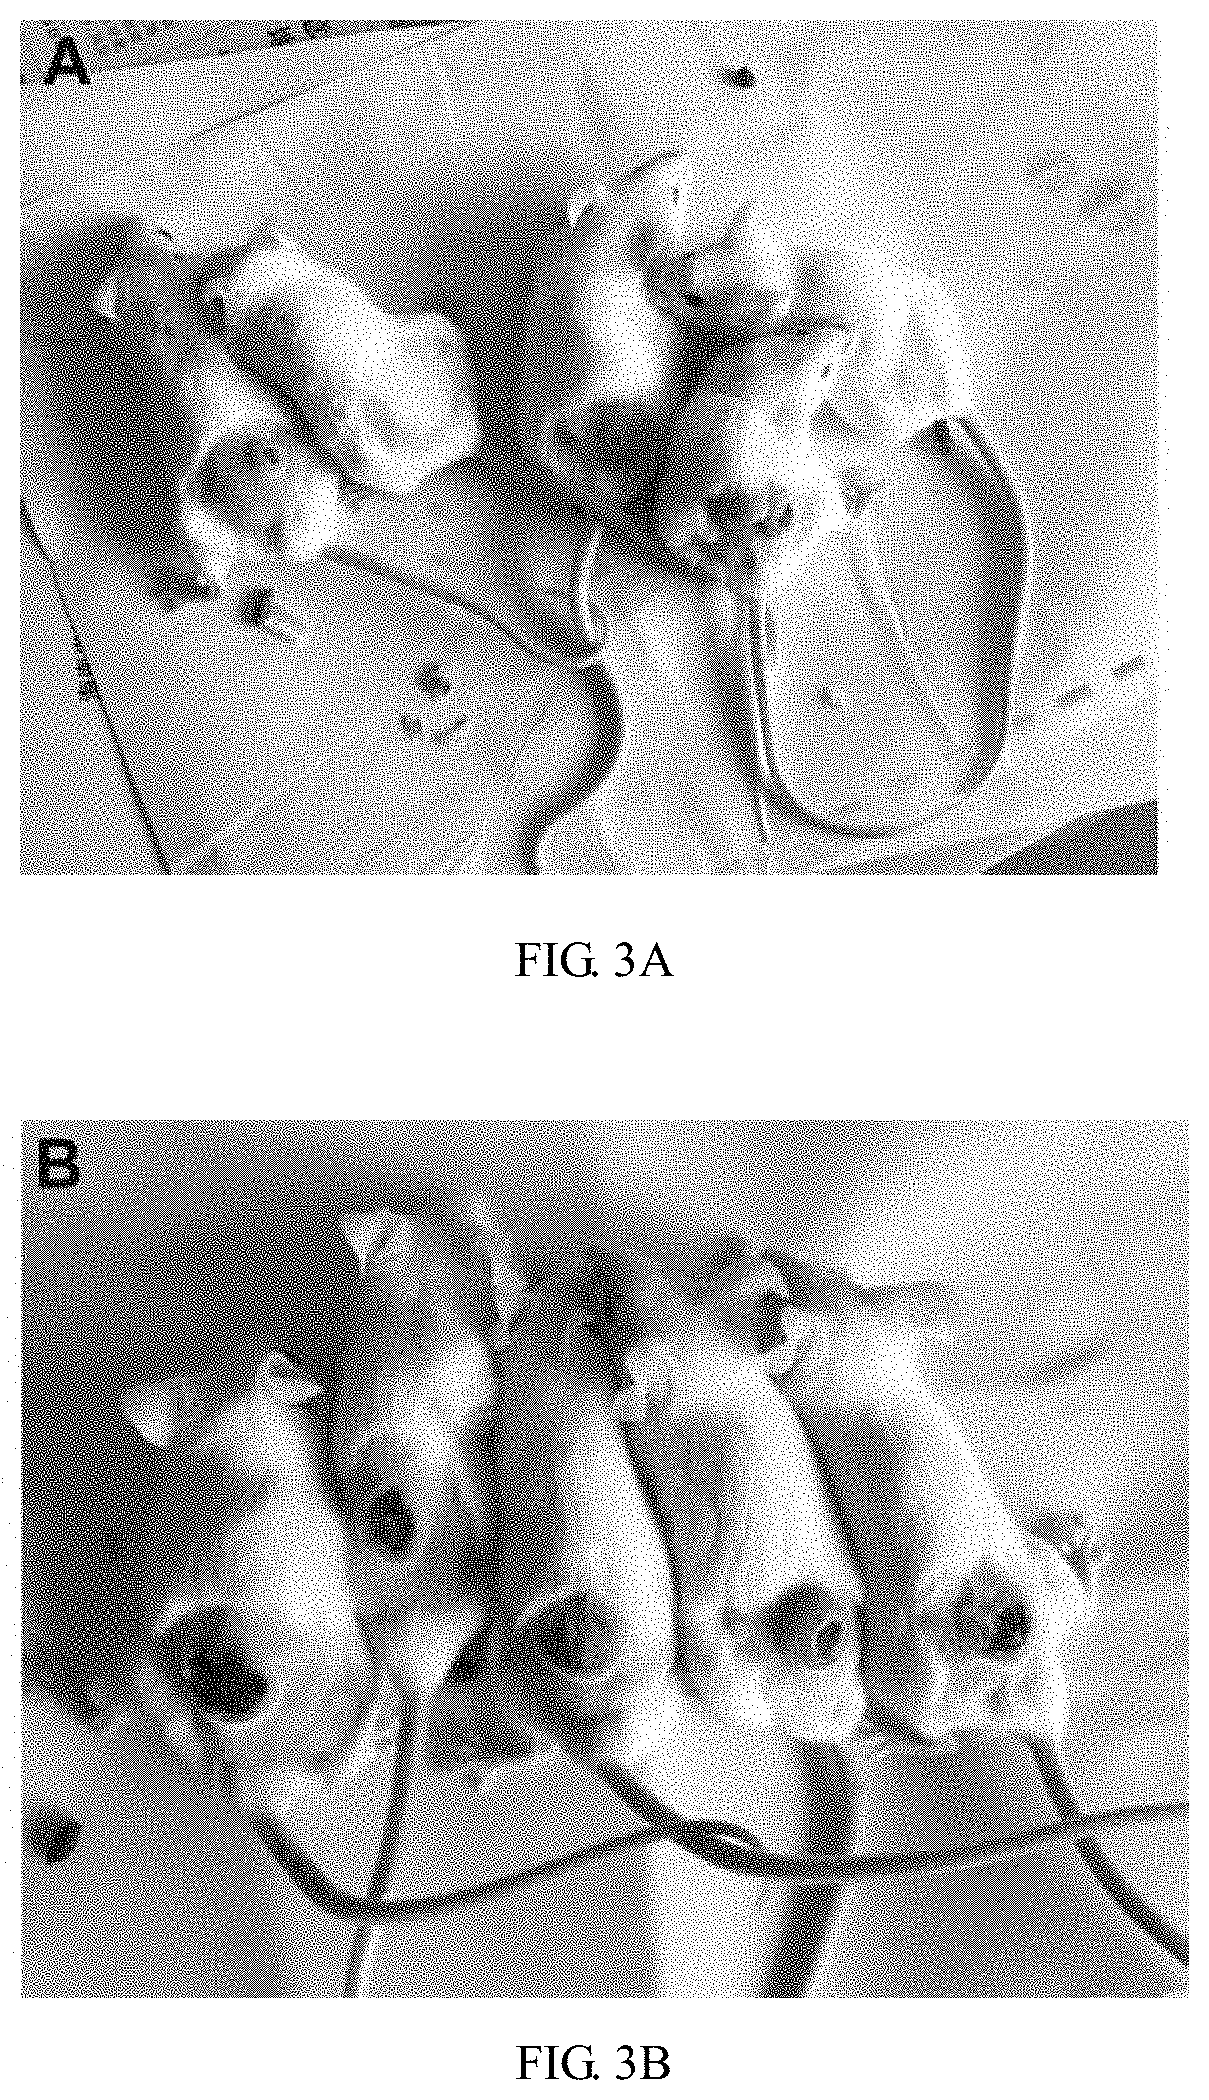 Bacteriologically-modified whole-cell tumor vaccine and method of making same